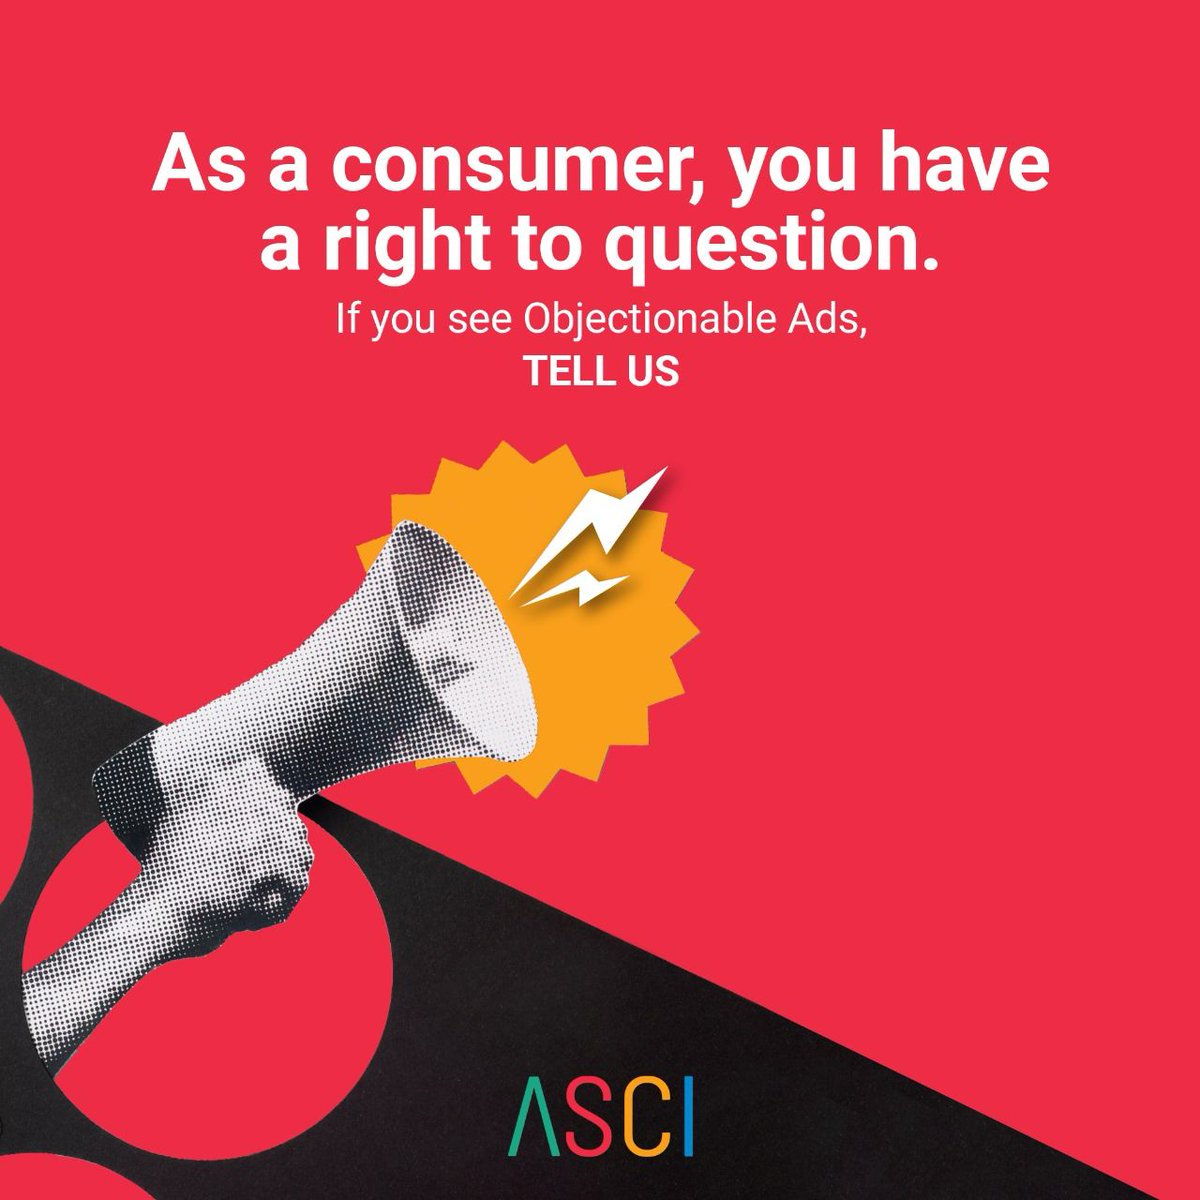 Raising your voice against misleading ads empowers you to make the right choice as a consumer.  To register a complaint, visit ascionline.in or WhatsApp us on 77100 12345

#KnowYourRIghts #ASCI #ASCIAcademy #StandAgainstWrong #Advertising #AdWorld